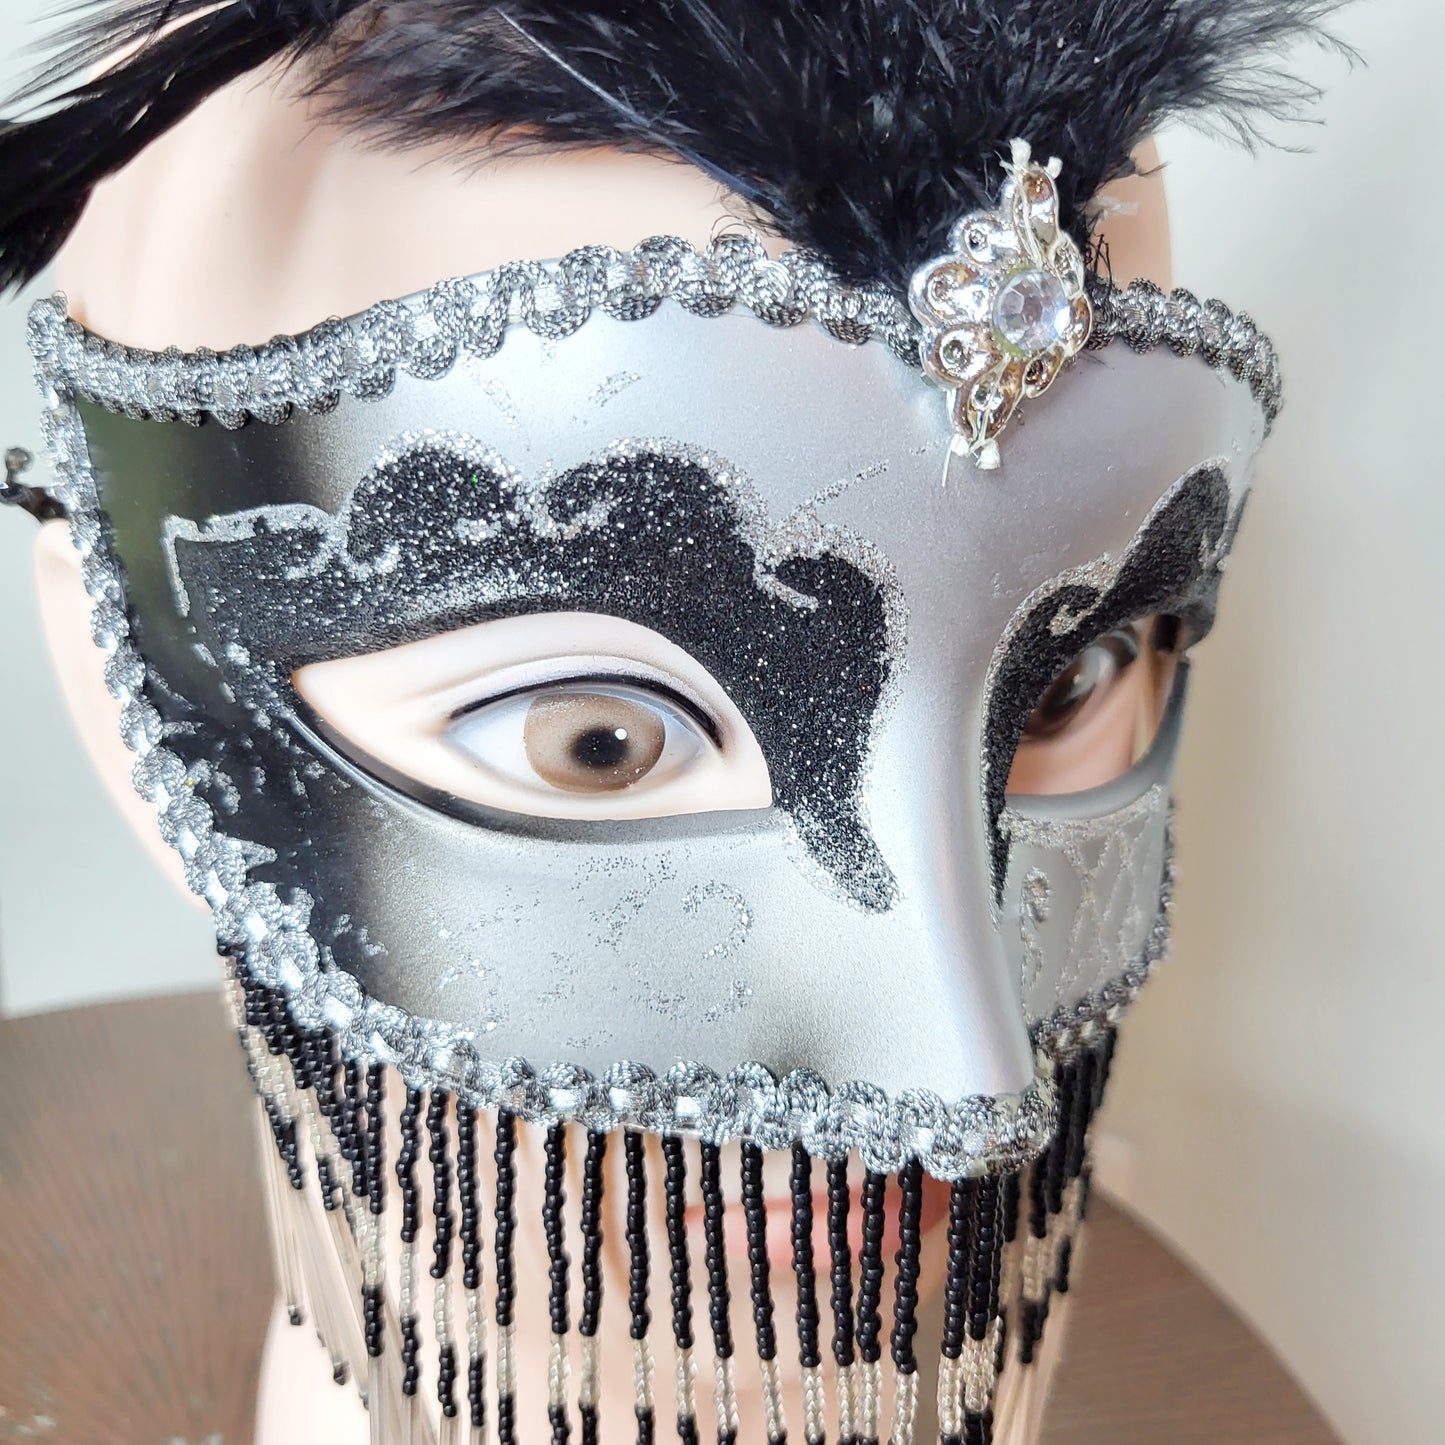 REWNDZ - Black and silver masquerade mask with feathers, minor flaws